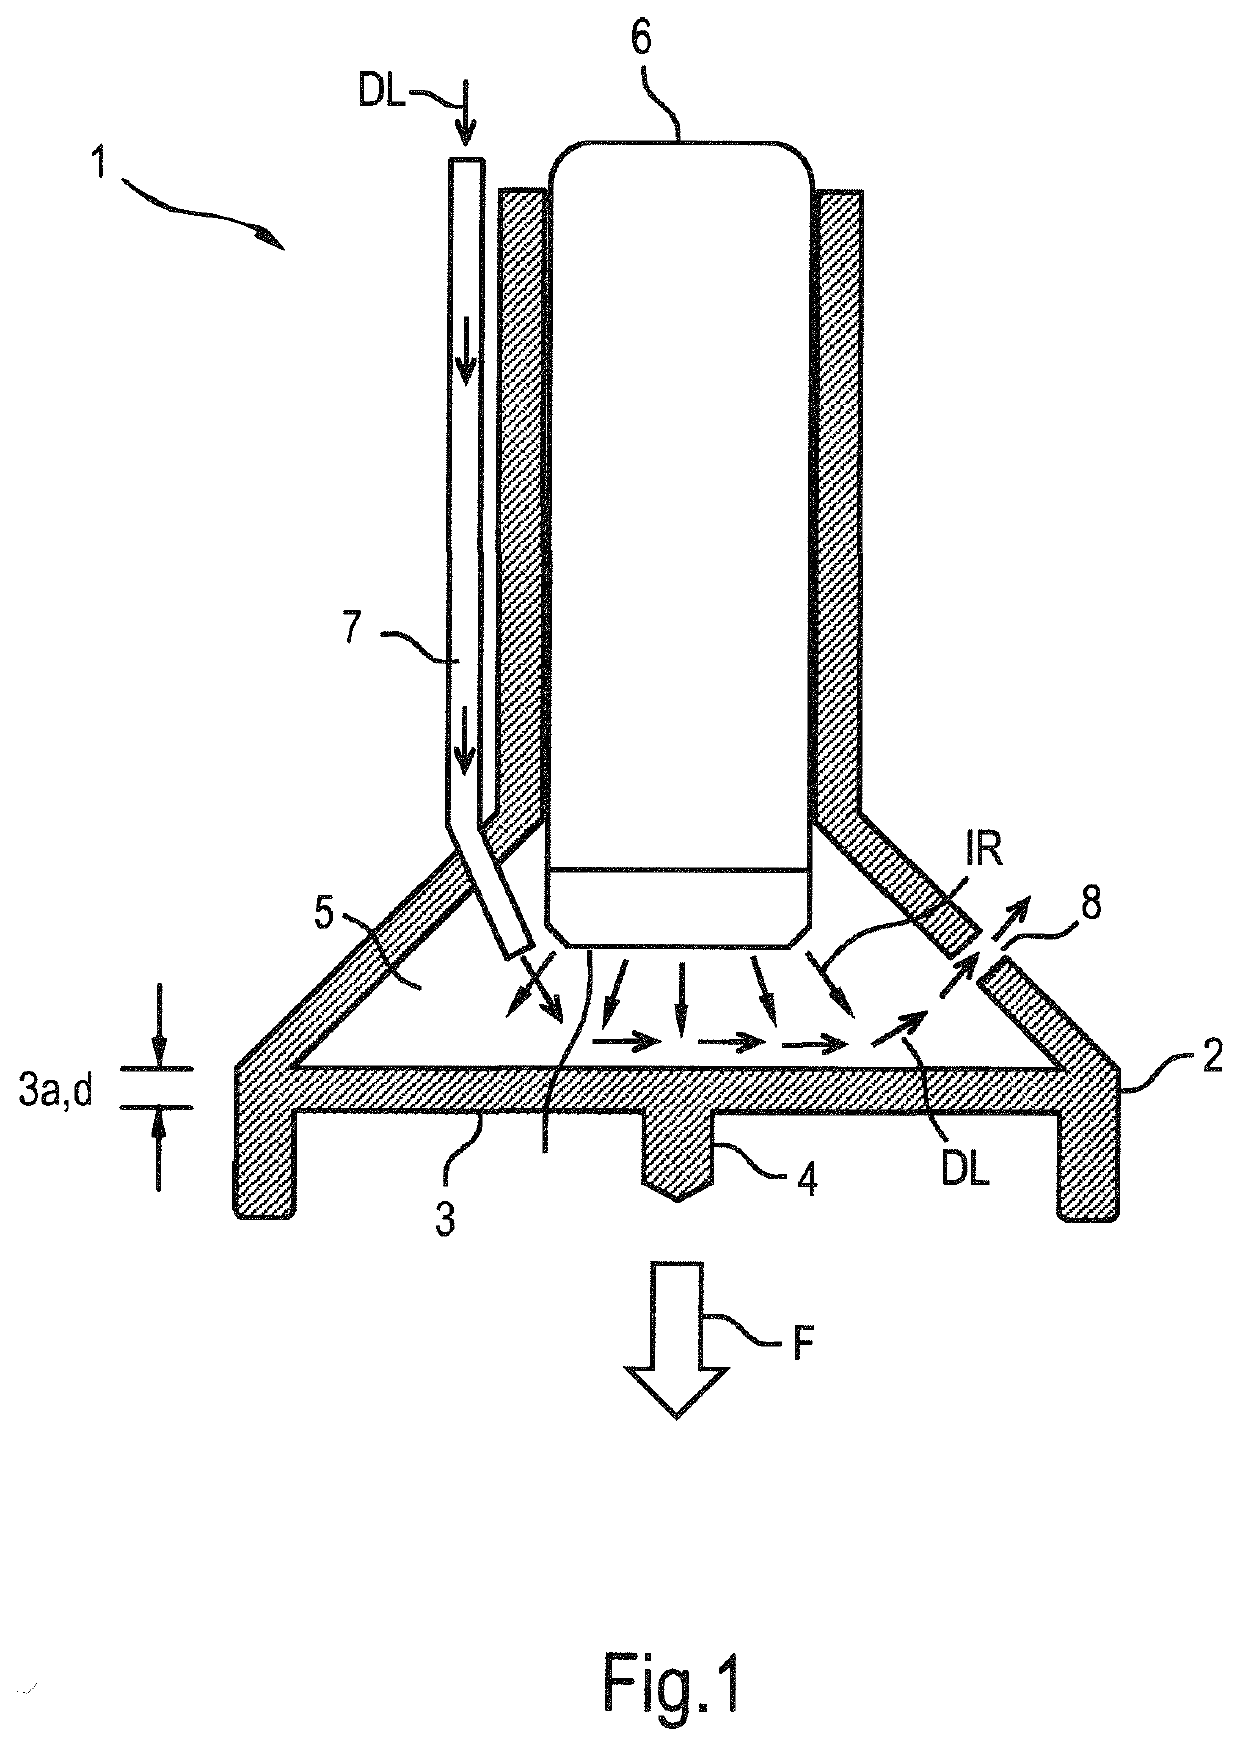 Contact welding tool and method for operating same